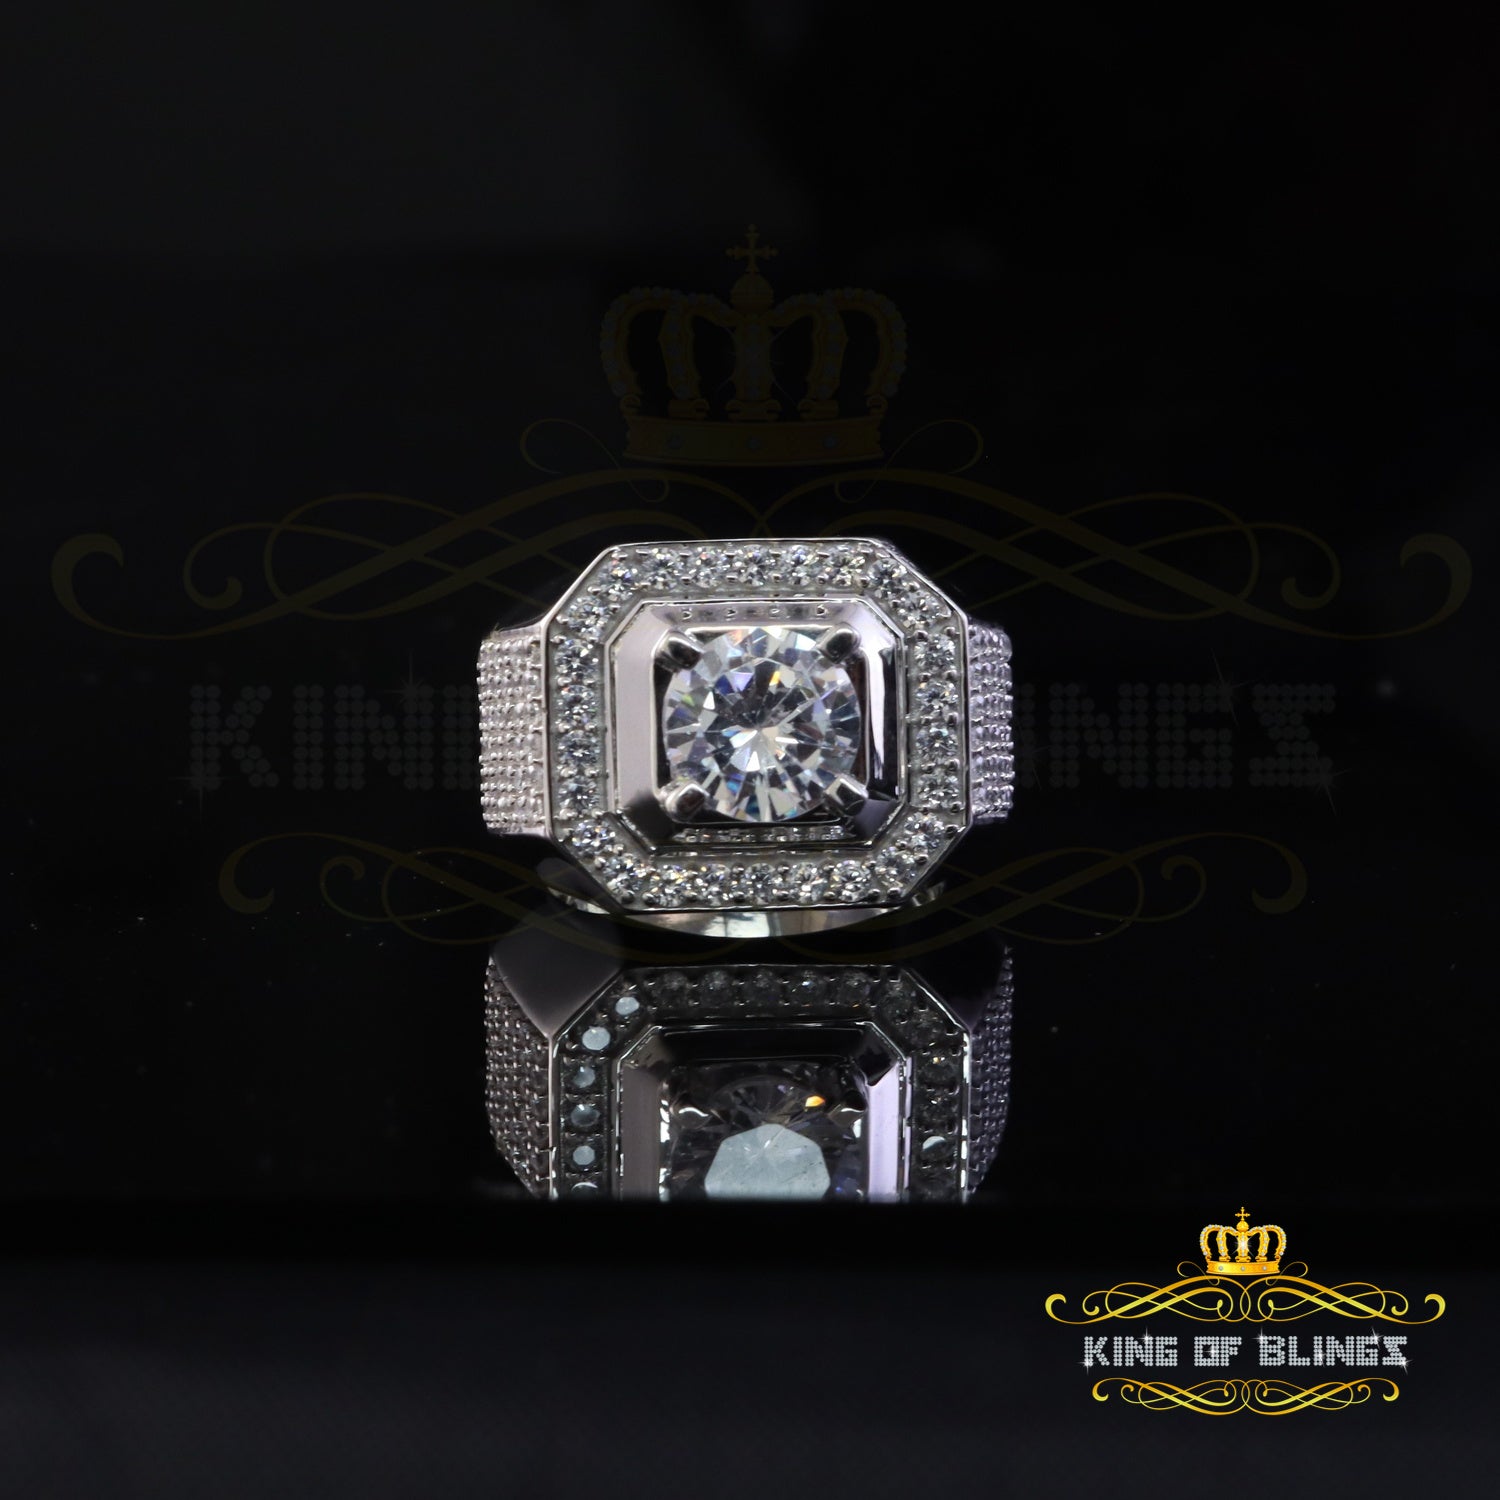 King Of Bling'sWhite Silver 7.10ct Cubic Zirconia Square Men's Adjustable Ring From SZ 9 to 11 KING OF BLINGS